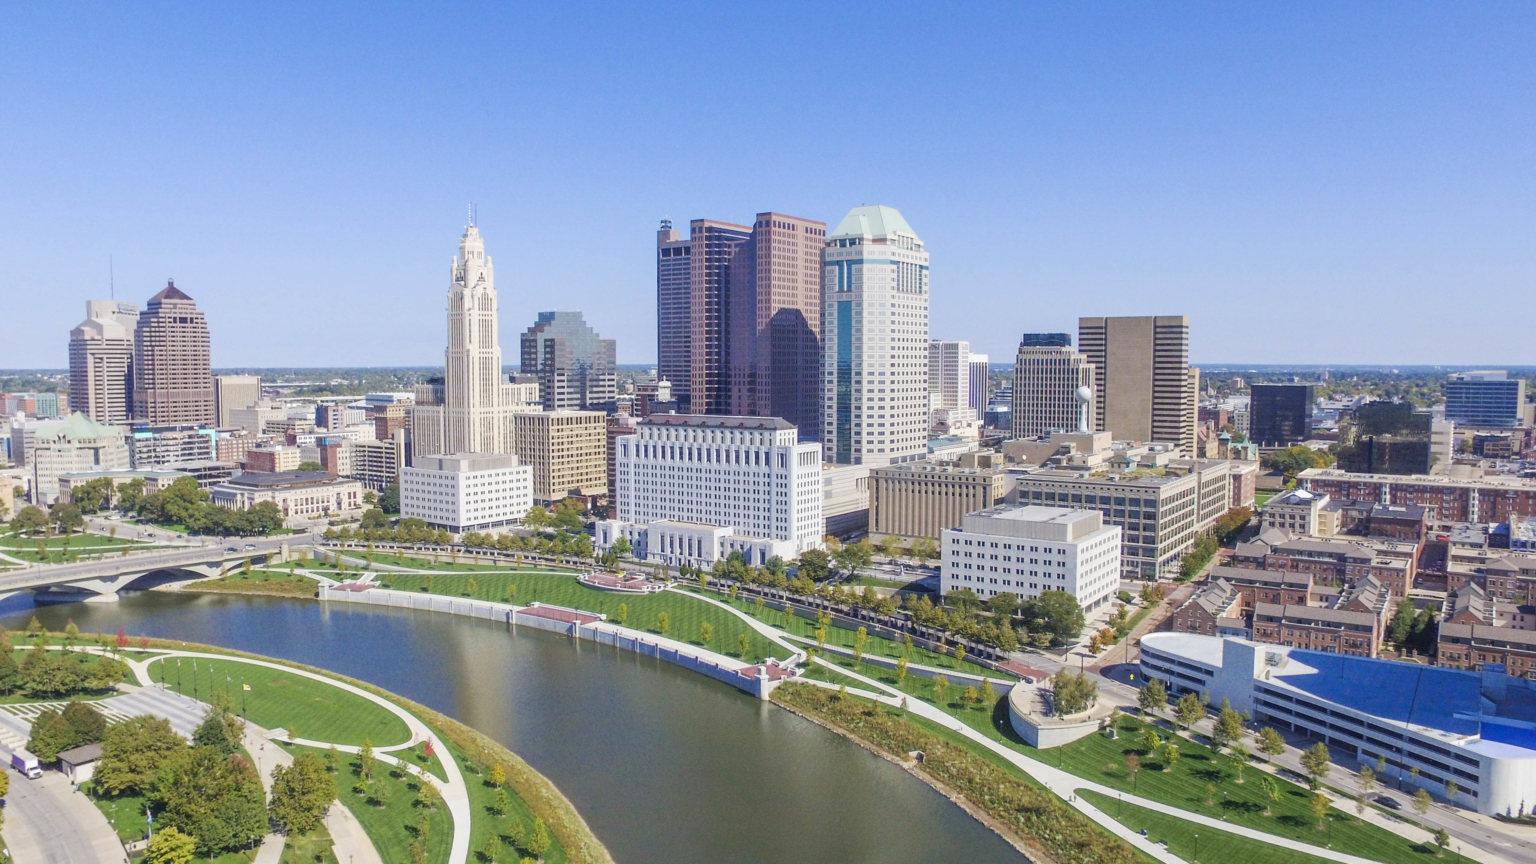 the columbus ohio skyline with the river and recreation paths in the foreground